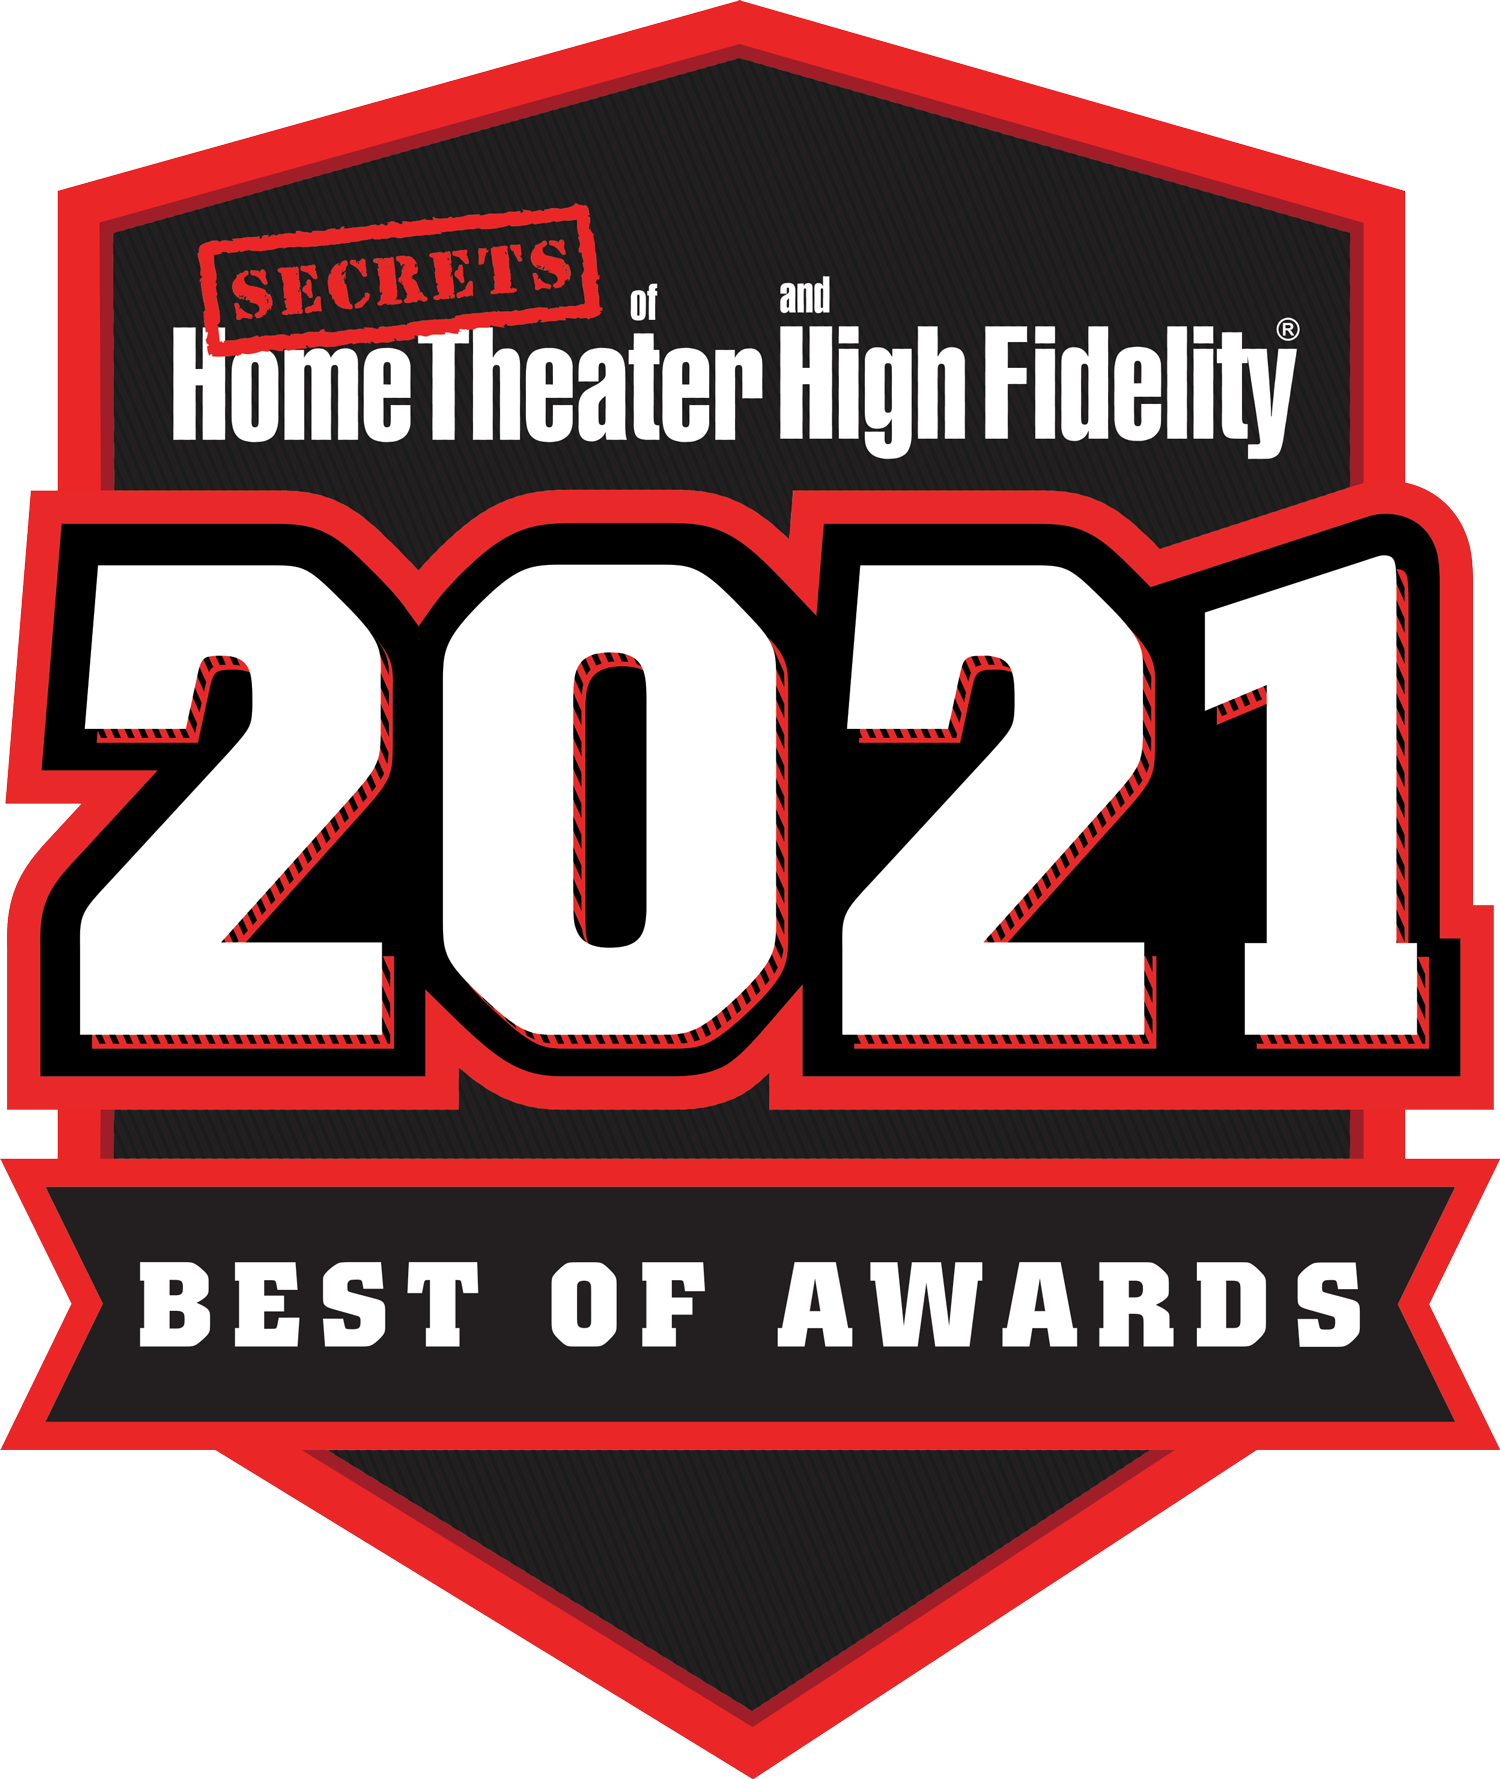 Secrets of Home Theater and High Fidelity - Best of Awards 2021